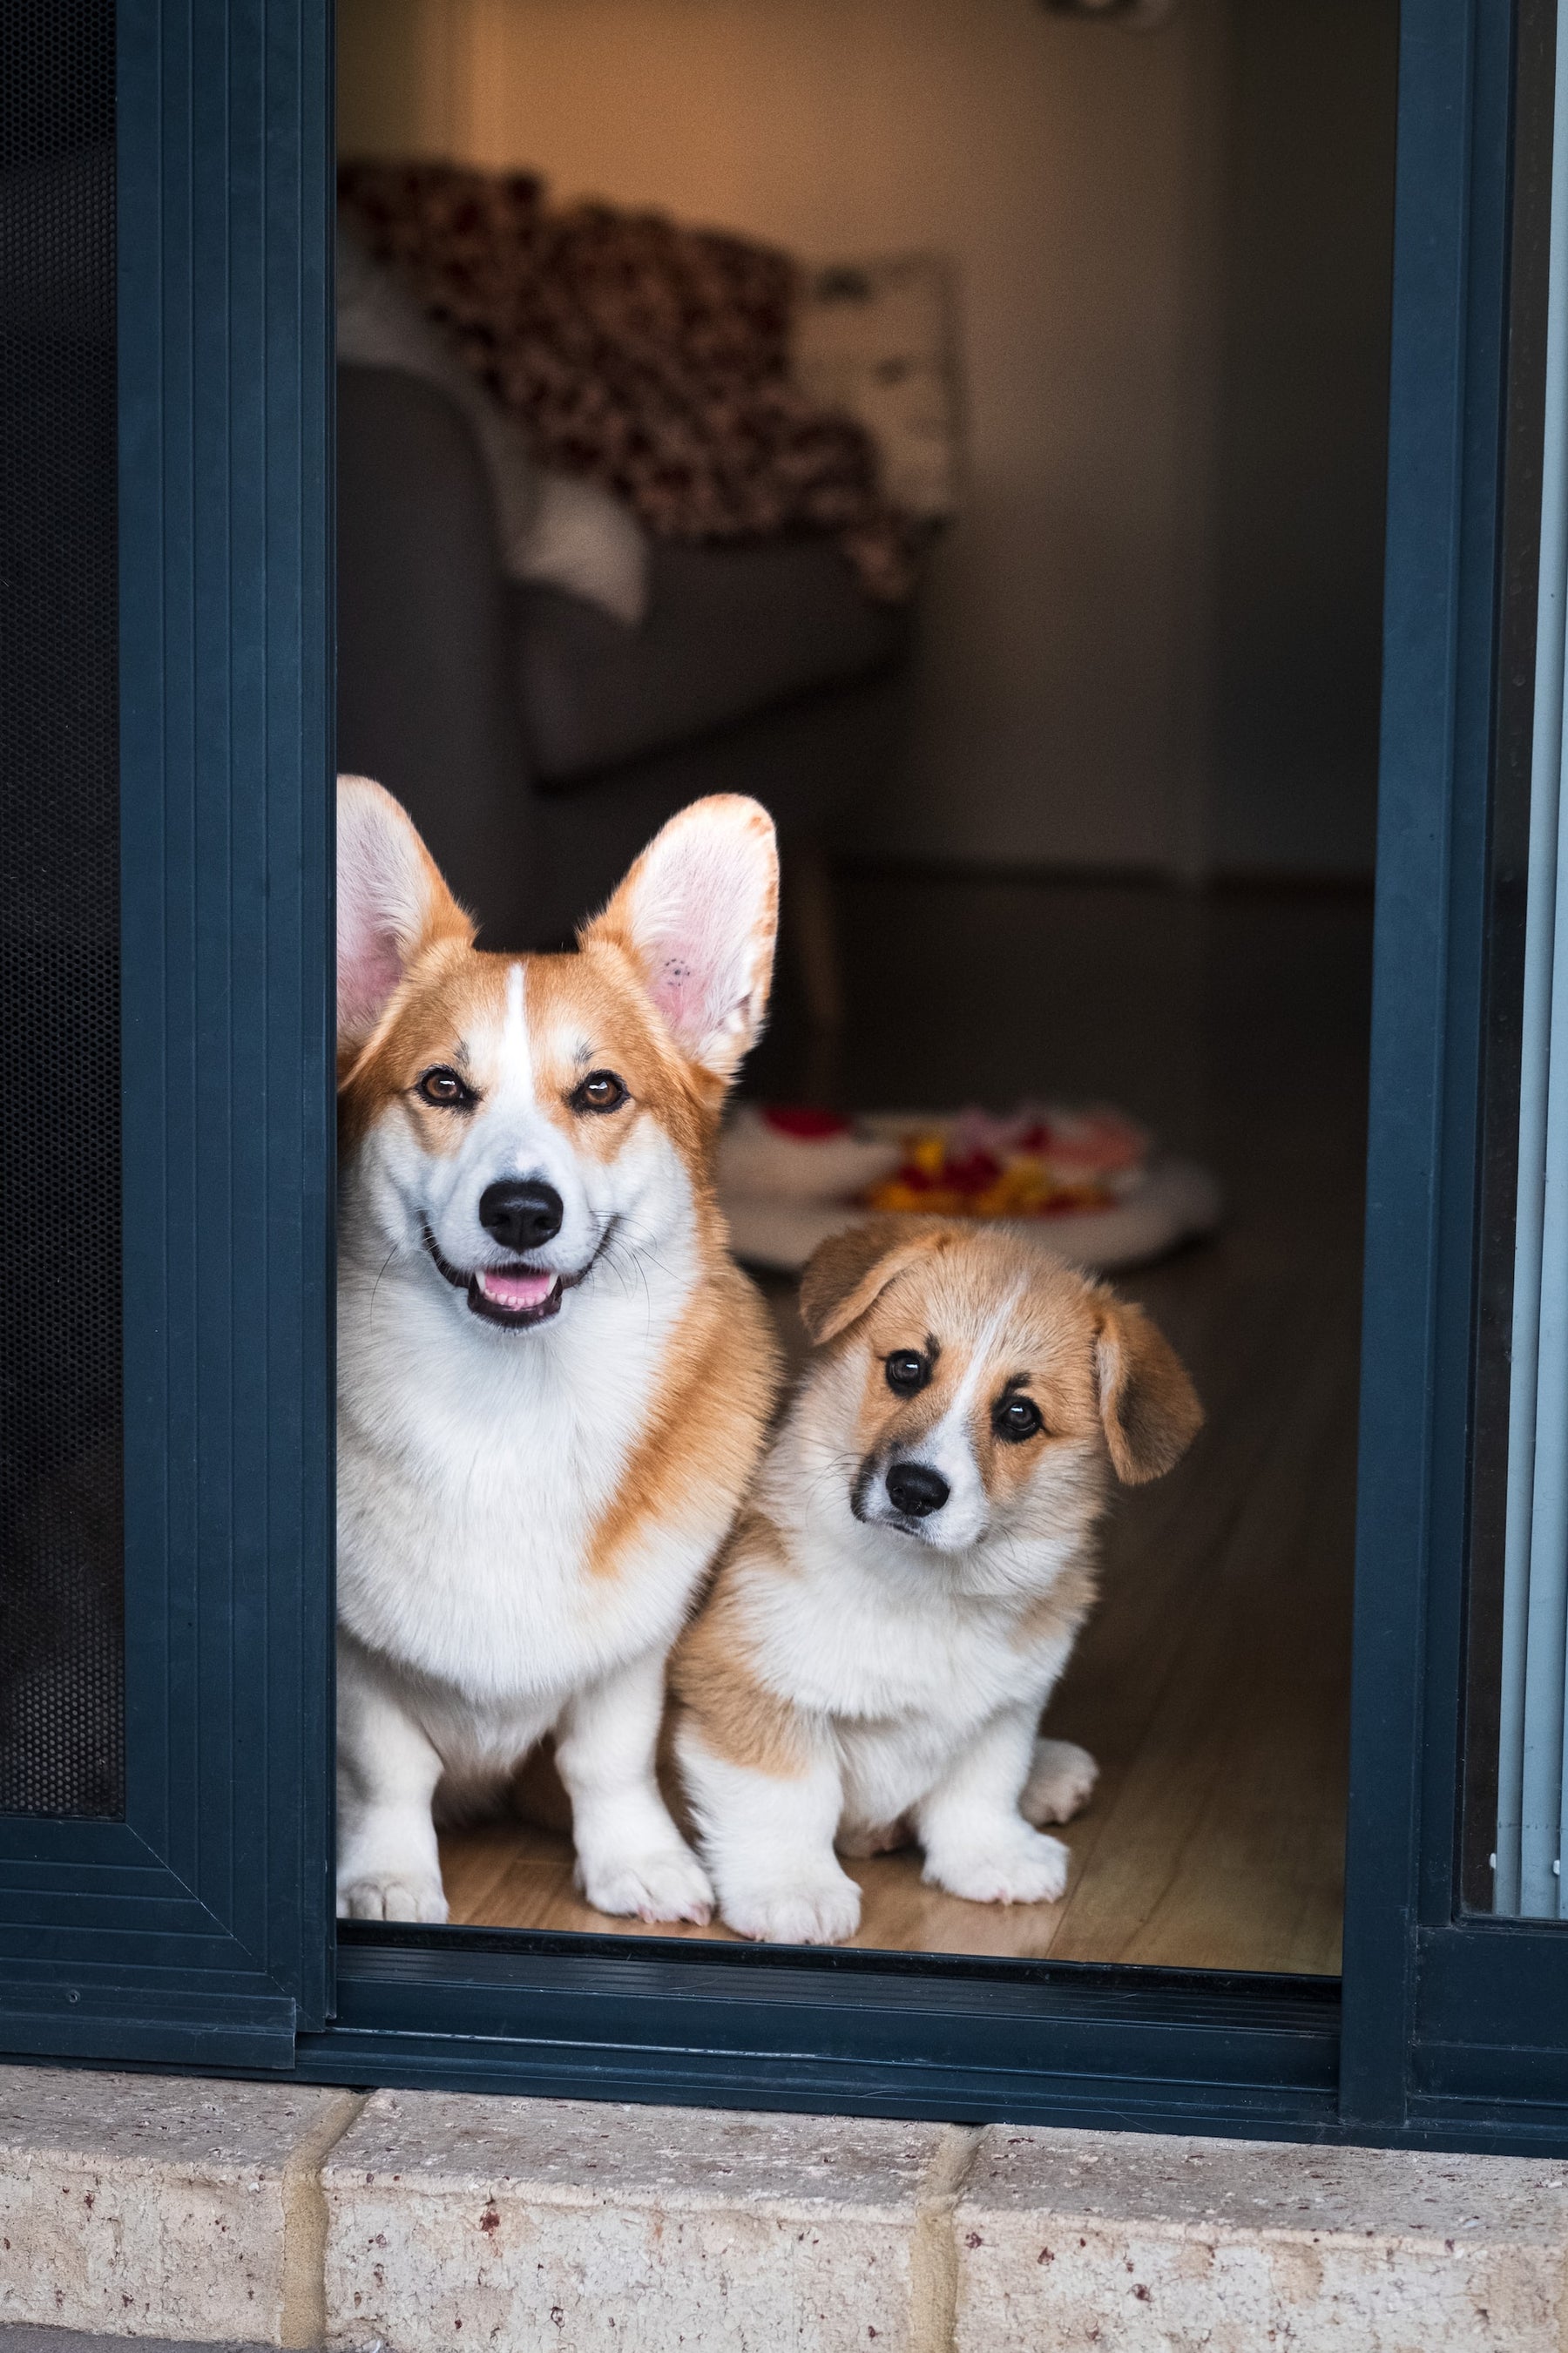 Paws and Panels: How to Protect Doors from Dog Scratches